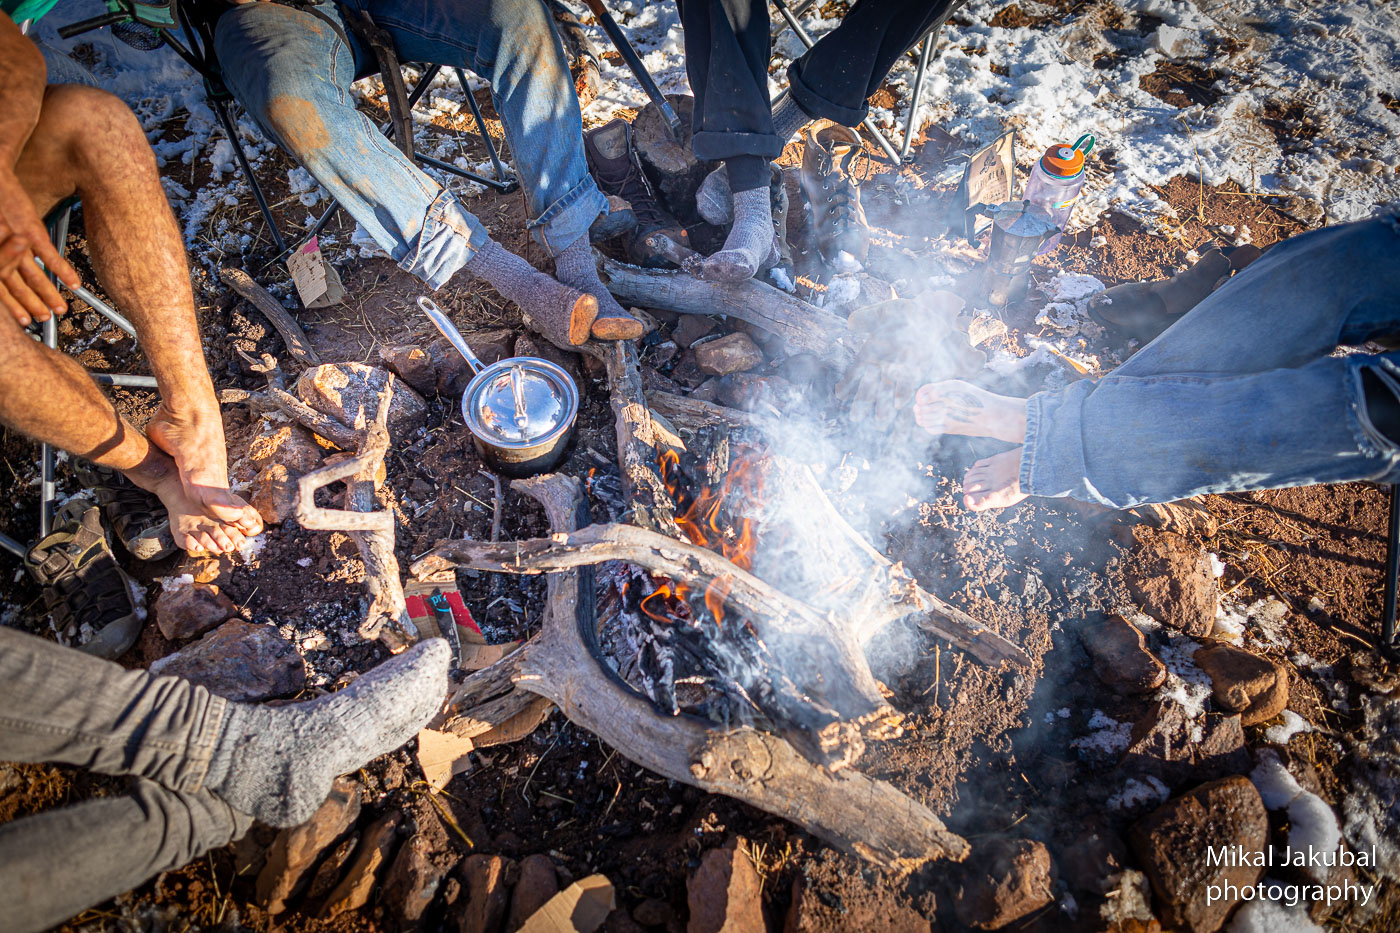 A small campfire from above. Five sets of legs and feet are seen from above as people warm their feet.